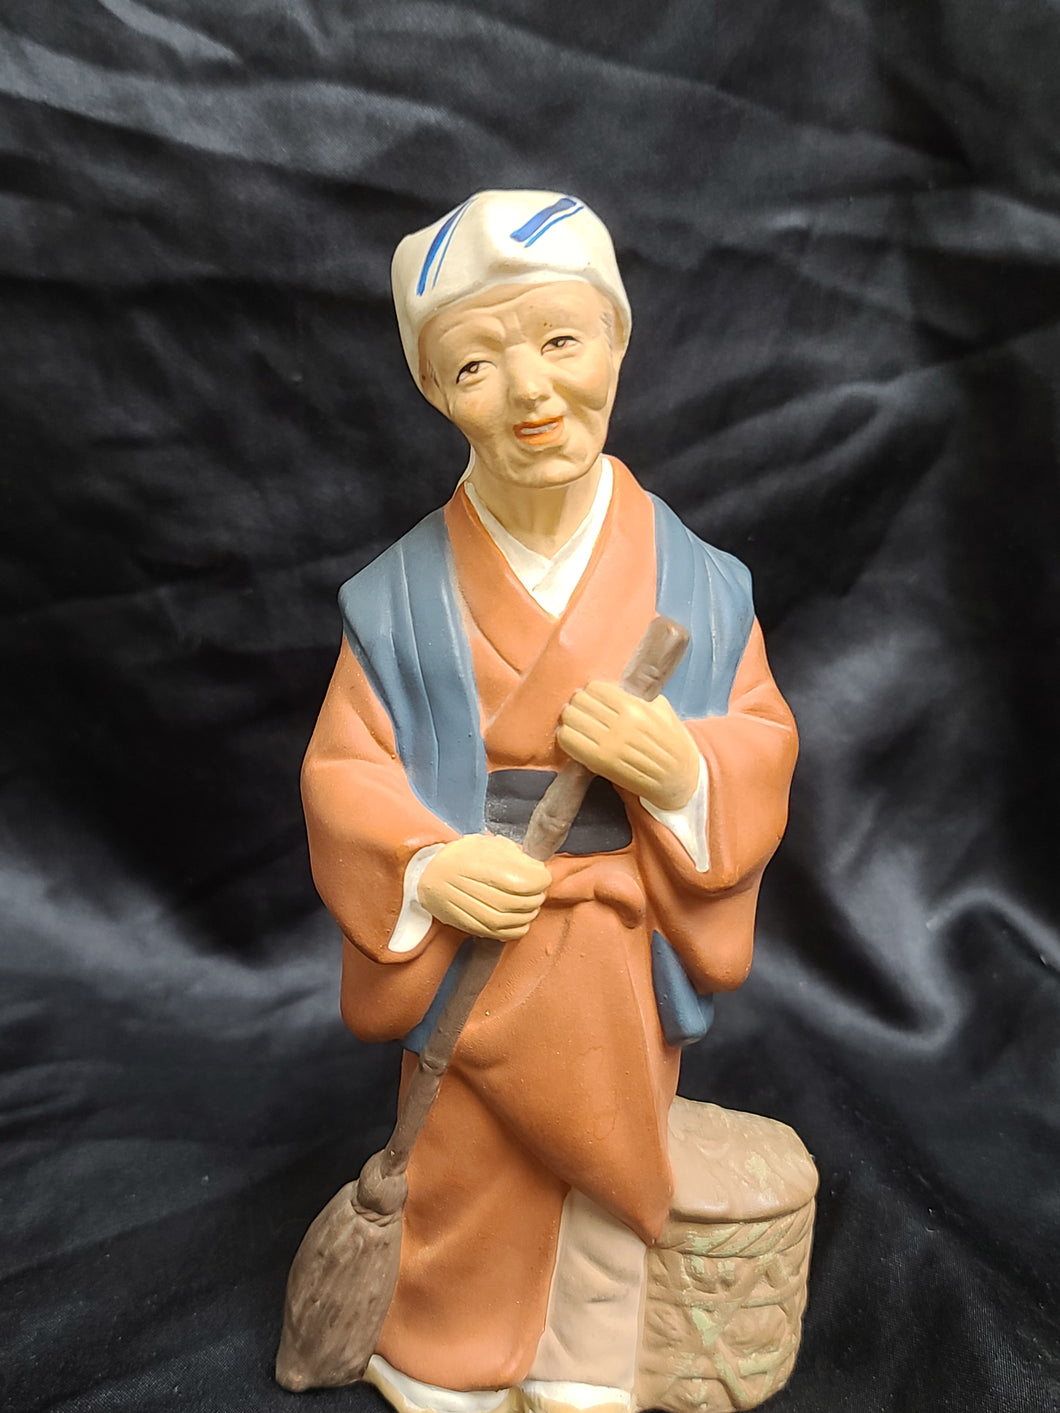 Vintage Norcrest Old Asian Woman Figurine
Good condition, no chips or cracks